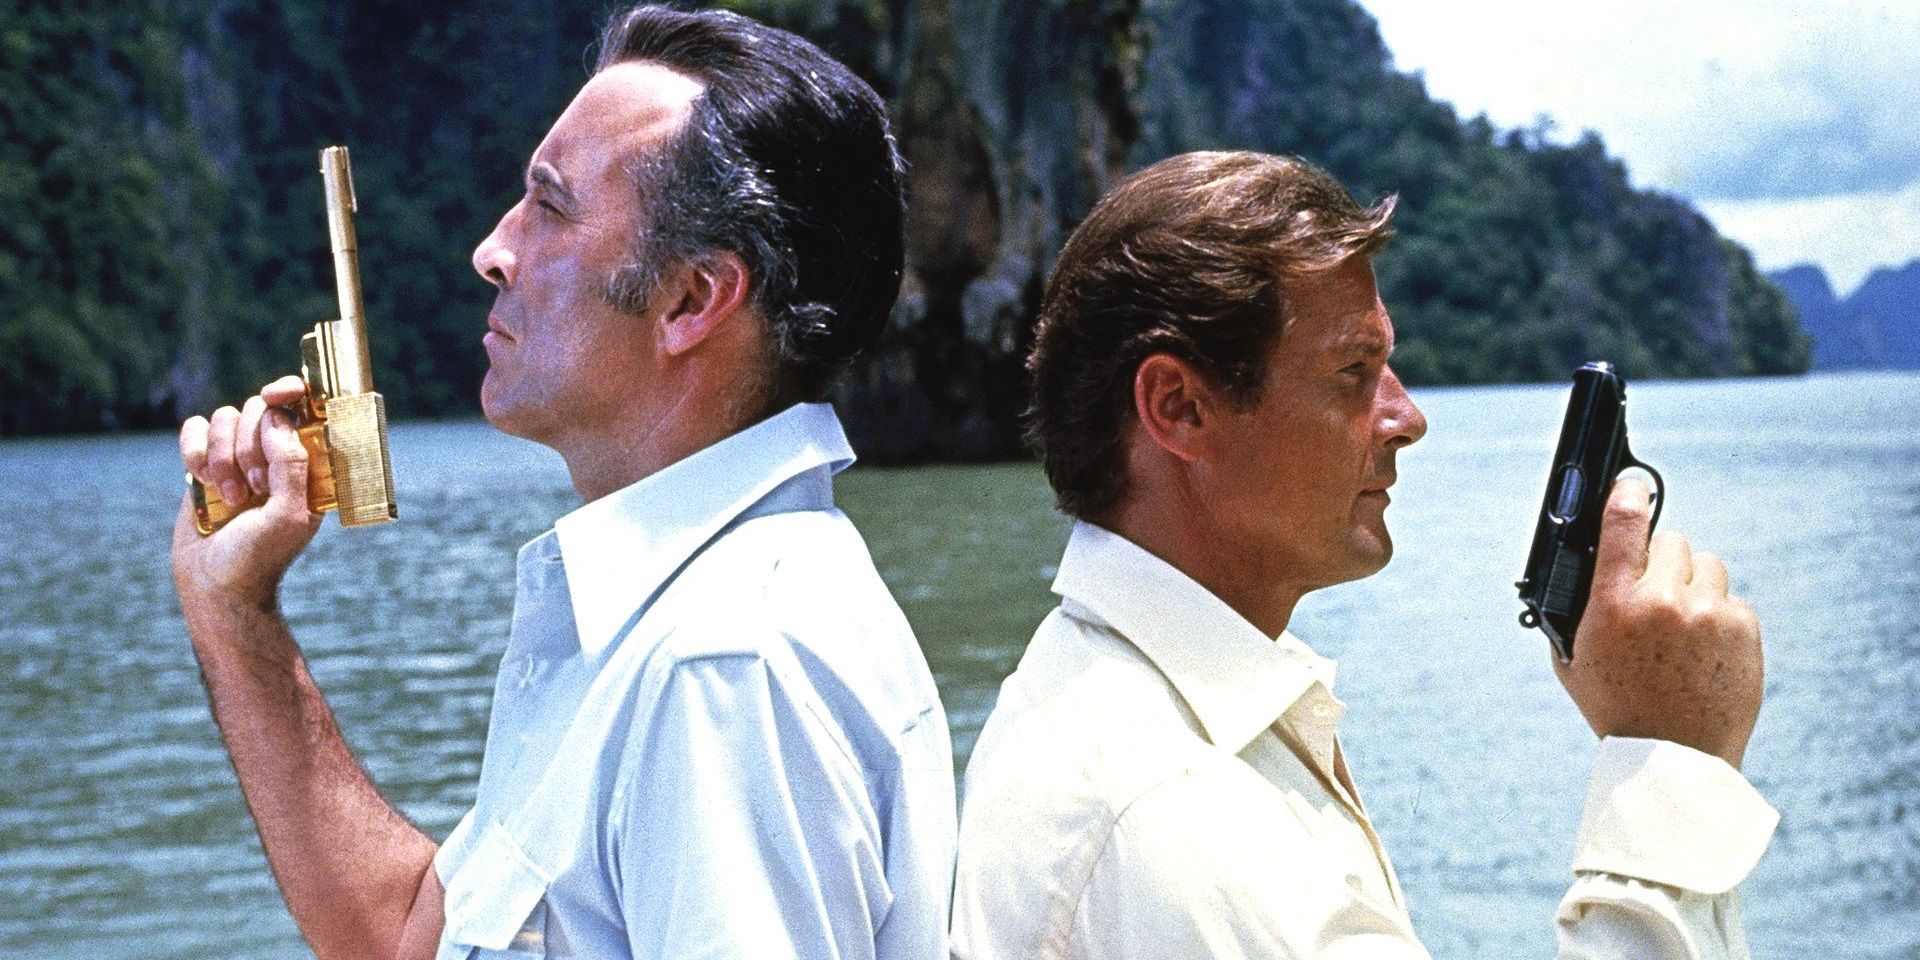 Bond and Scaramanga back-to-back in The Man with the Golden Gun